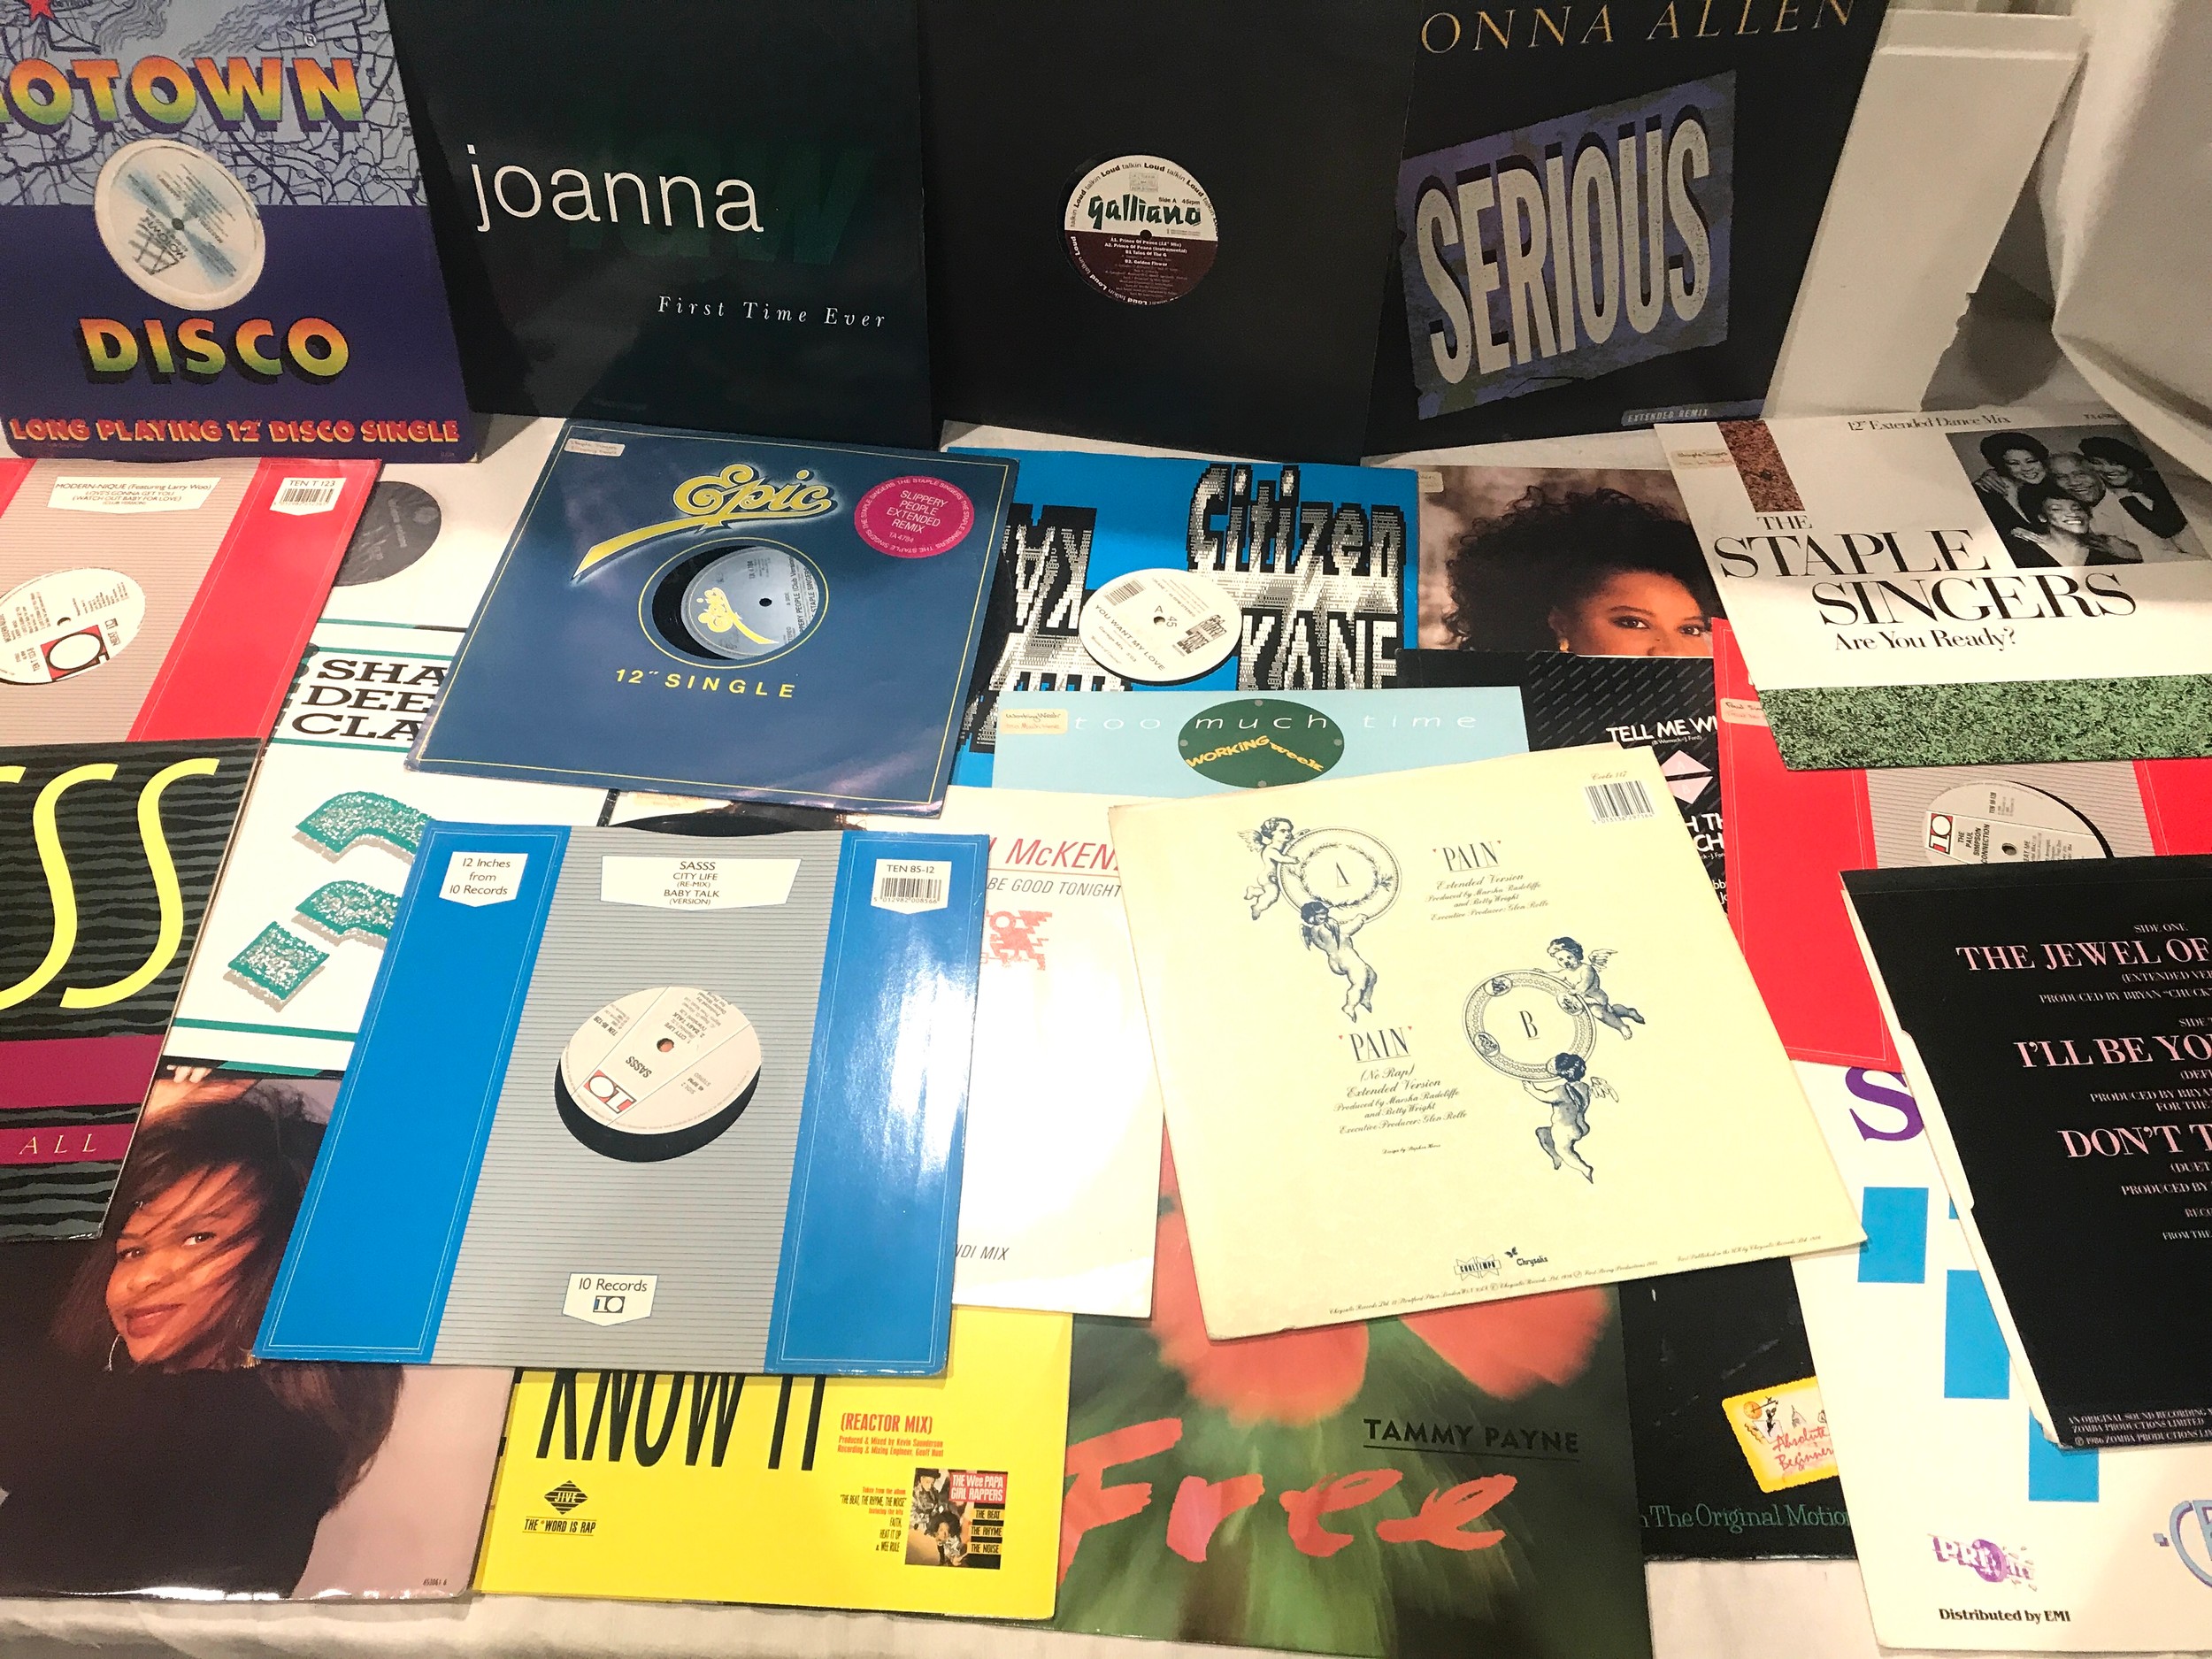 Large selection of 12 inch assorted record singles to include Donna Allen, Galliano, Rodrigo Bay etc